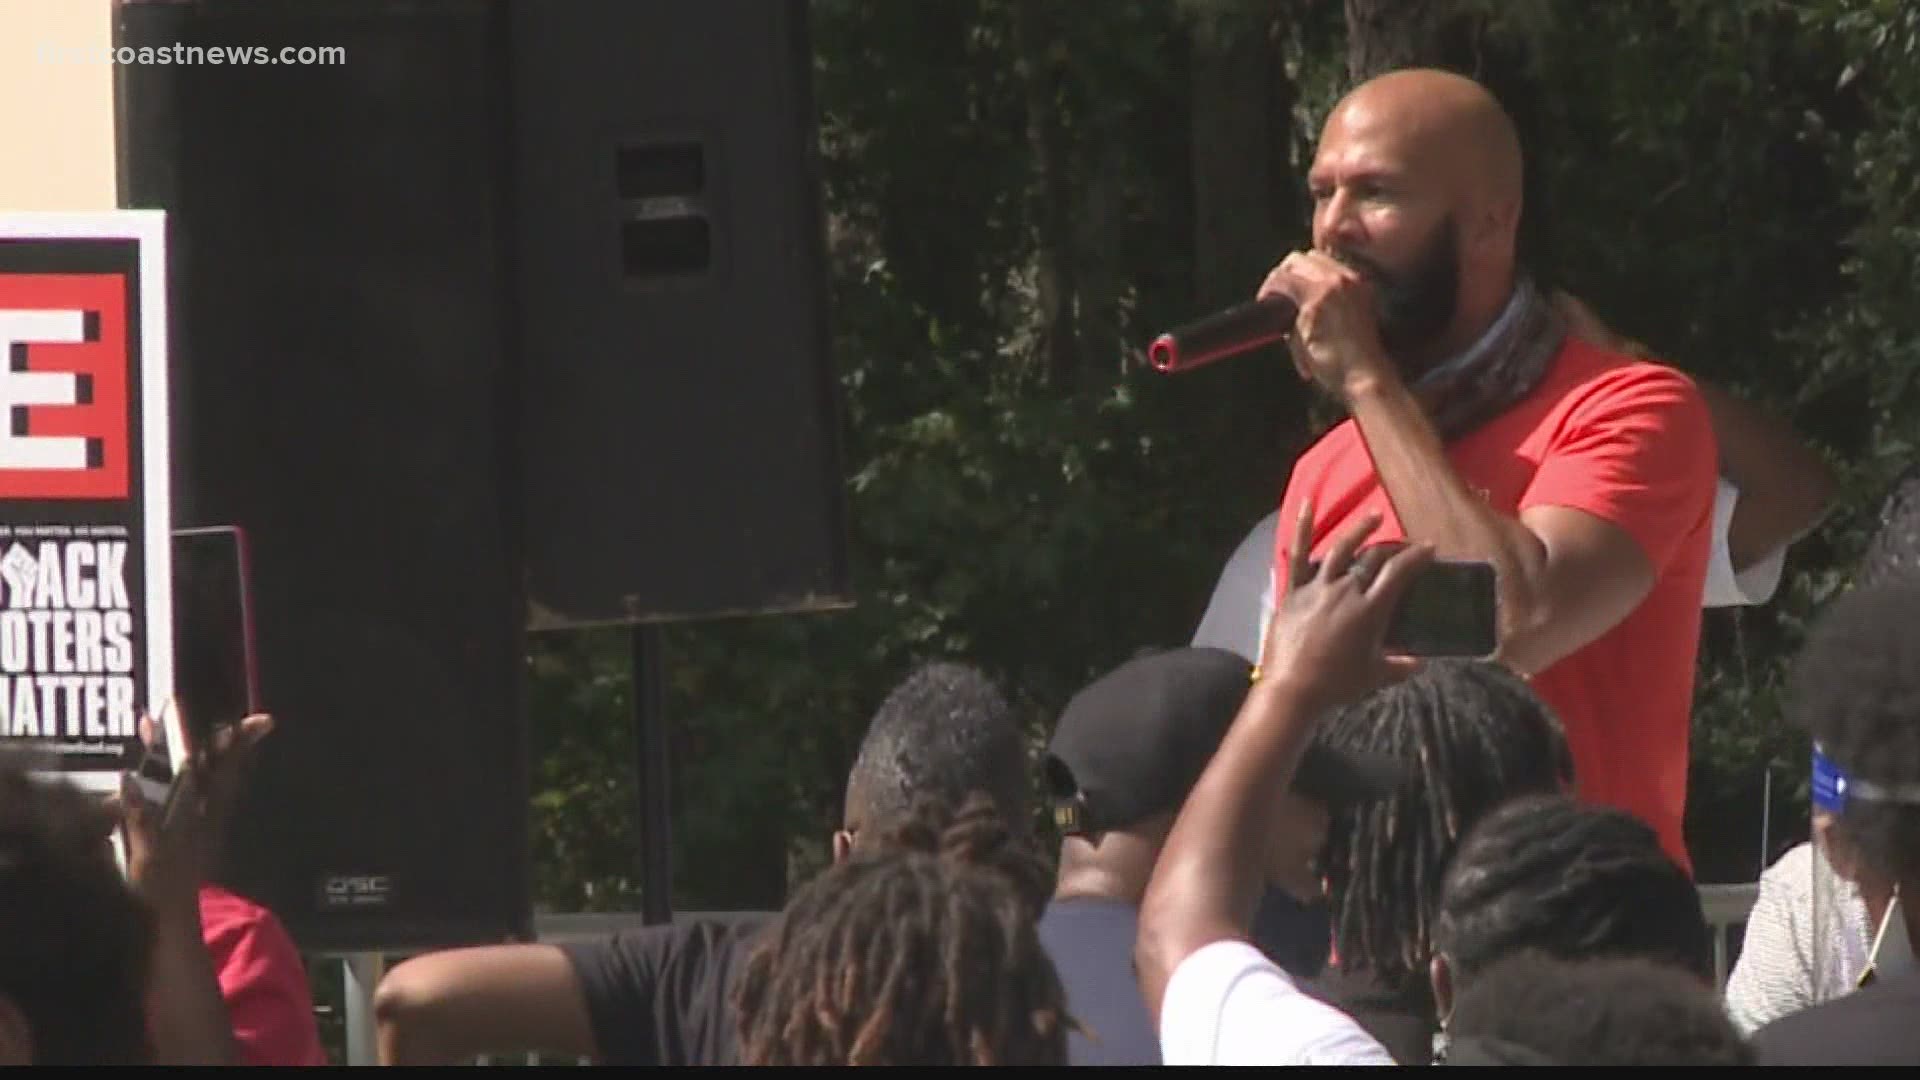 Rapper and actor Common spoke to a crowd Saturday afternoon in northwest Jacksonville and encouraged Black voters to make their voices heard at the polls.